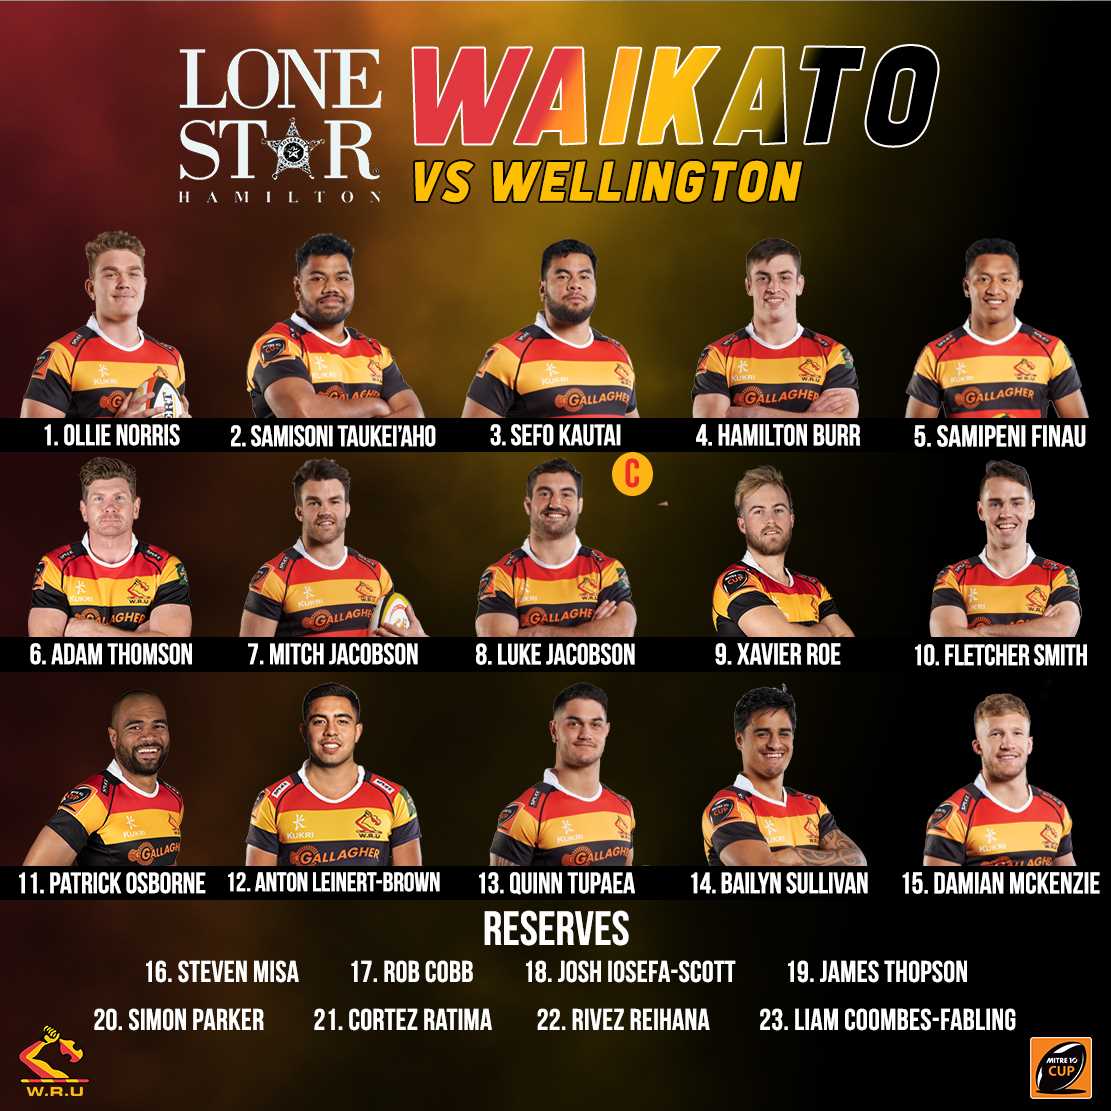 Waikato announce team for their first Mitre 10 Cup match against Wellington